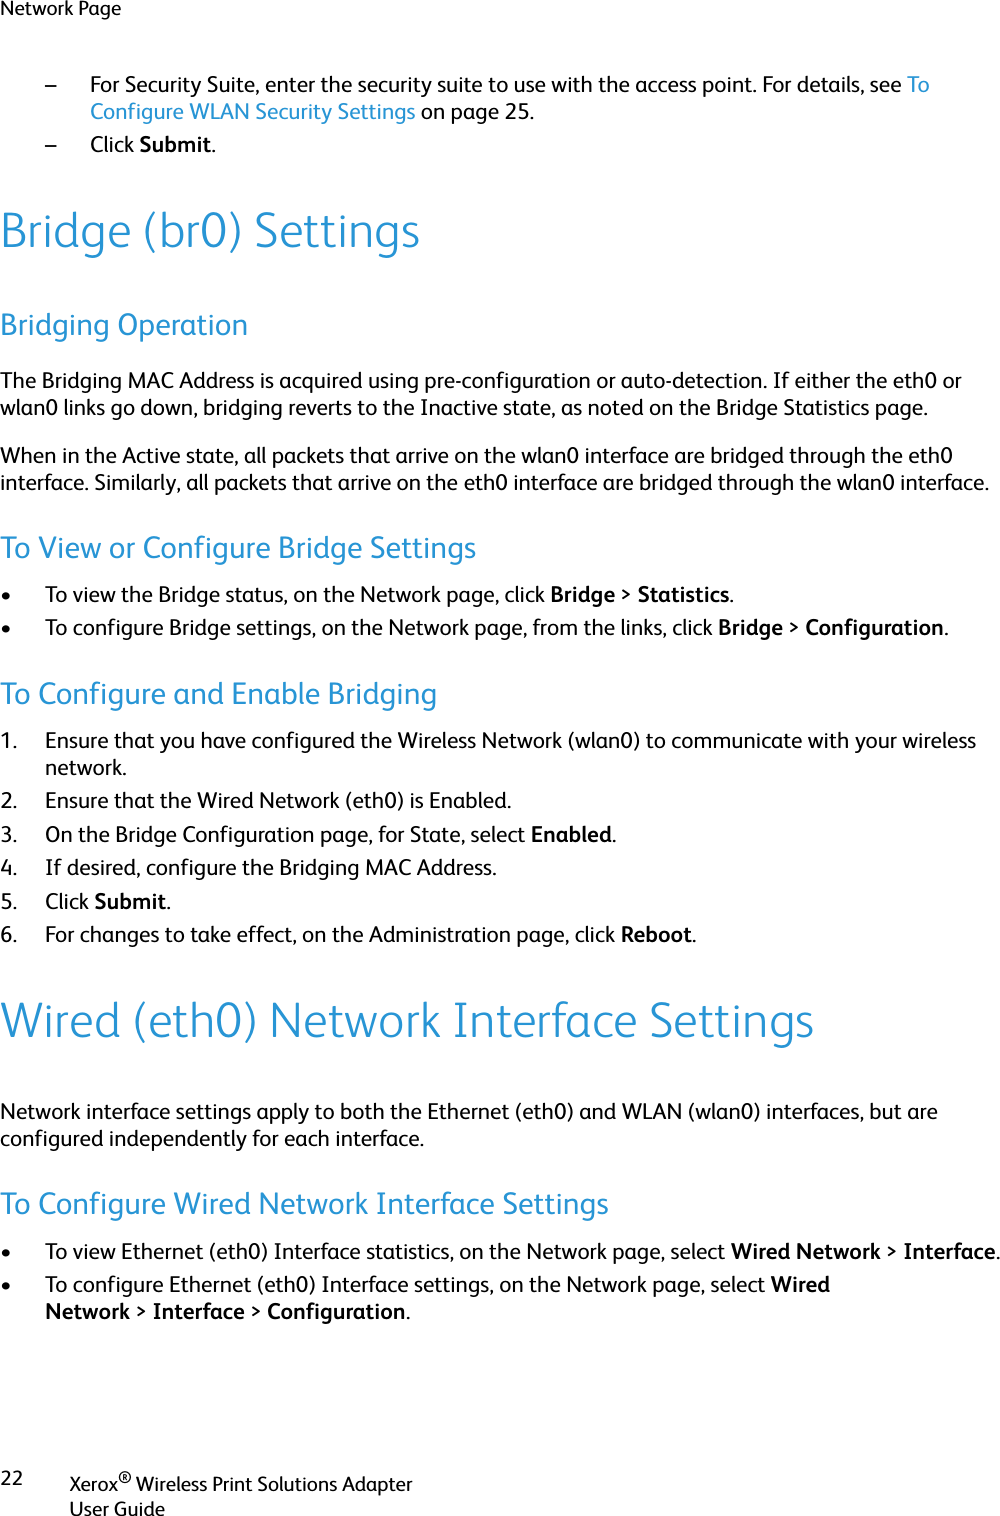 Network PageXerox® Wireless Print Solutions AdapterUser Guide22– For Security Suite, enter the security suite to use with the access point. For details, see To  Configure WLAN Security Settings on page 25.–Click Submit.Bridge (br0) SettingsBridging OperationThe Bridging MAC Address is acquired using pre-configuration or auto-detection. If either the eth0 or wlan0 links go down, bridging reverts to the Inactive state, as noted on the Bridge Statistics page.When in the Active state, all packets that arrive on the wlan0 interface are bridged through the eth0 interface. Similarly, all packets that arrive on the eth0 interface are bridged through the wlan0 interface.To View or Configure Bridge Settings• To view the Bridge status, on the Network page, click Bridge &gt;Statistics.• To configure Bridge settings, on the Network page, from the links, click Bridge &gt;Configuration.To Configure and Enable Bridging1. Ensure that you have configured the Wireless Network (wlan0) to communicate with your wireless network.2. Ensure that the Wired Network (eth0) is Enabled.3. On the Bridge Configuration page, for State, select Enabled.4. If desired, configure the Bridging MAC Address.5. Click Submit.6. For changes to take effect, on the Administration page, click Reboot.Wired (eth0) Network Interface SettingsNetwork interface settings apply to both the Ethernet (eth0) and WLAN (wlan0) interfaces, but are configured independently for each interface.To Configure Wired Network Interface Settings• To view Ethernet (eth0) Interface statistics, on the Network page, select Wired Network &gt;Interface.• To configure Ethernet (eth0) Interface settings, on the Network page, select Wired Network &gt;Interface &gt;Configuration.